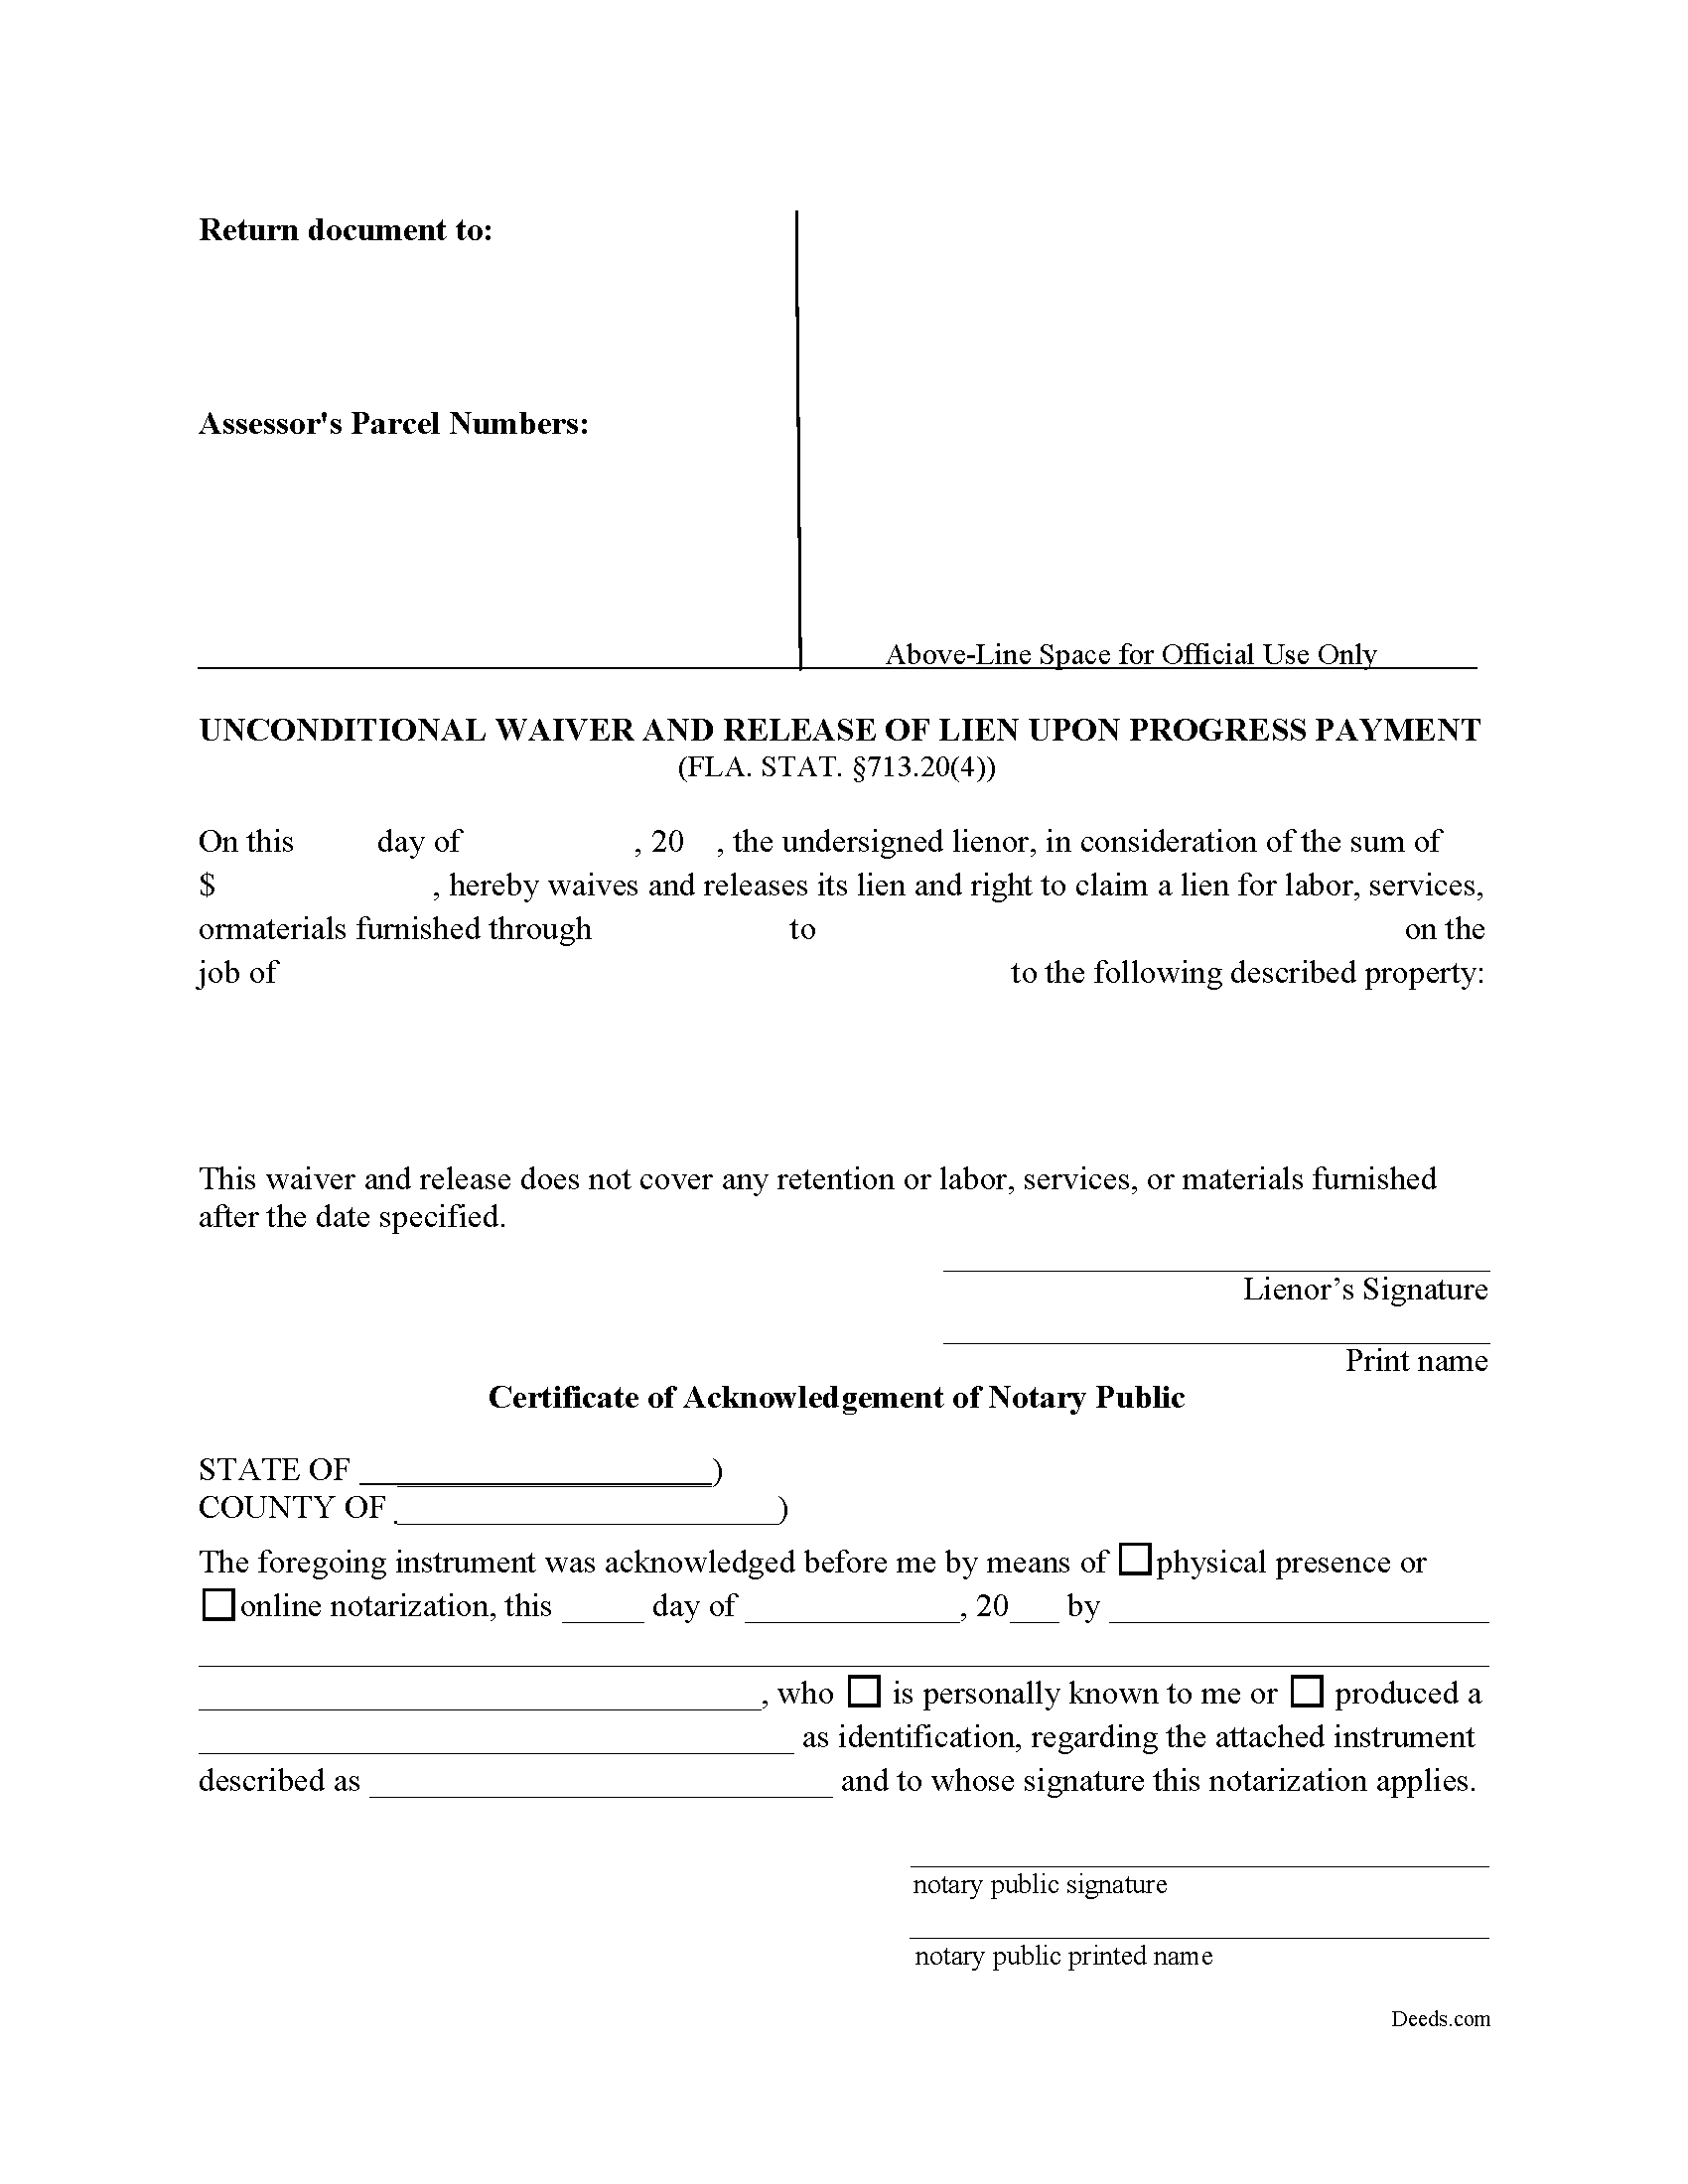 Unconditional Waiver and Release of Lien upon Progress Payment Form